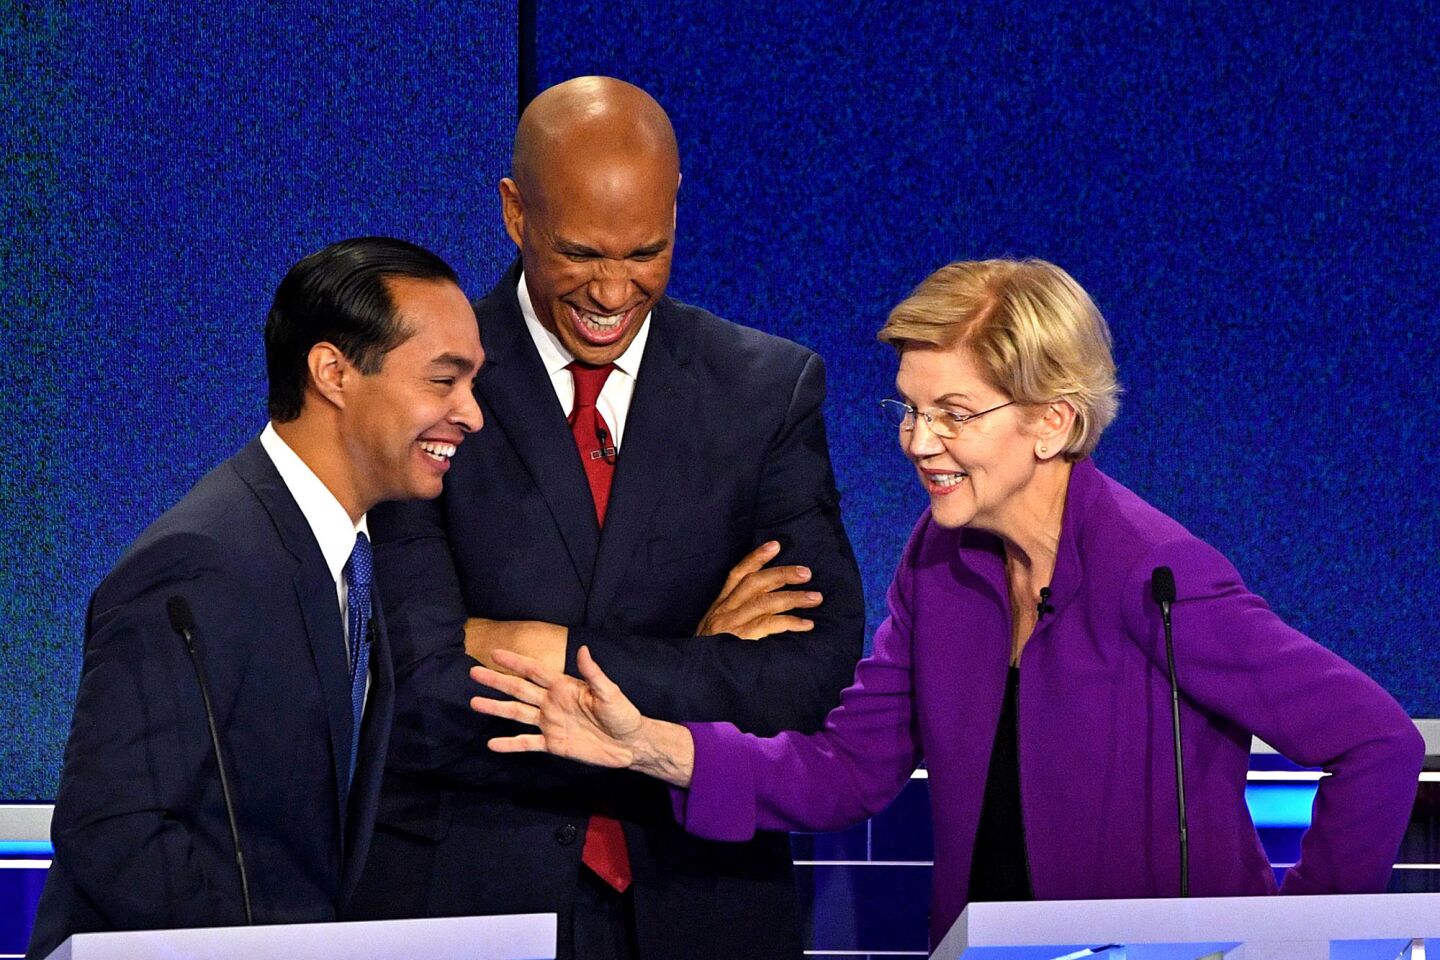 Democratic presidential hopefuls (fromL) Former US Secretary of Housing and Urban Development Julian Castro, US Senator from New Jersey Cory Booker and US Senator from Massachusetts Elizabeth Warren laugh during a break in the first Democratic primary debate of the 2020 presidential campaign season hosted by NBC News at the Adrienne Arsht Center for the Performing Arts in Miami, Florida, June 26, 2019.